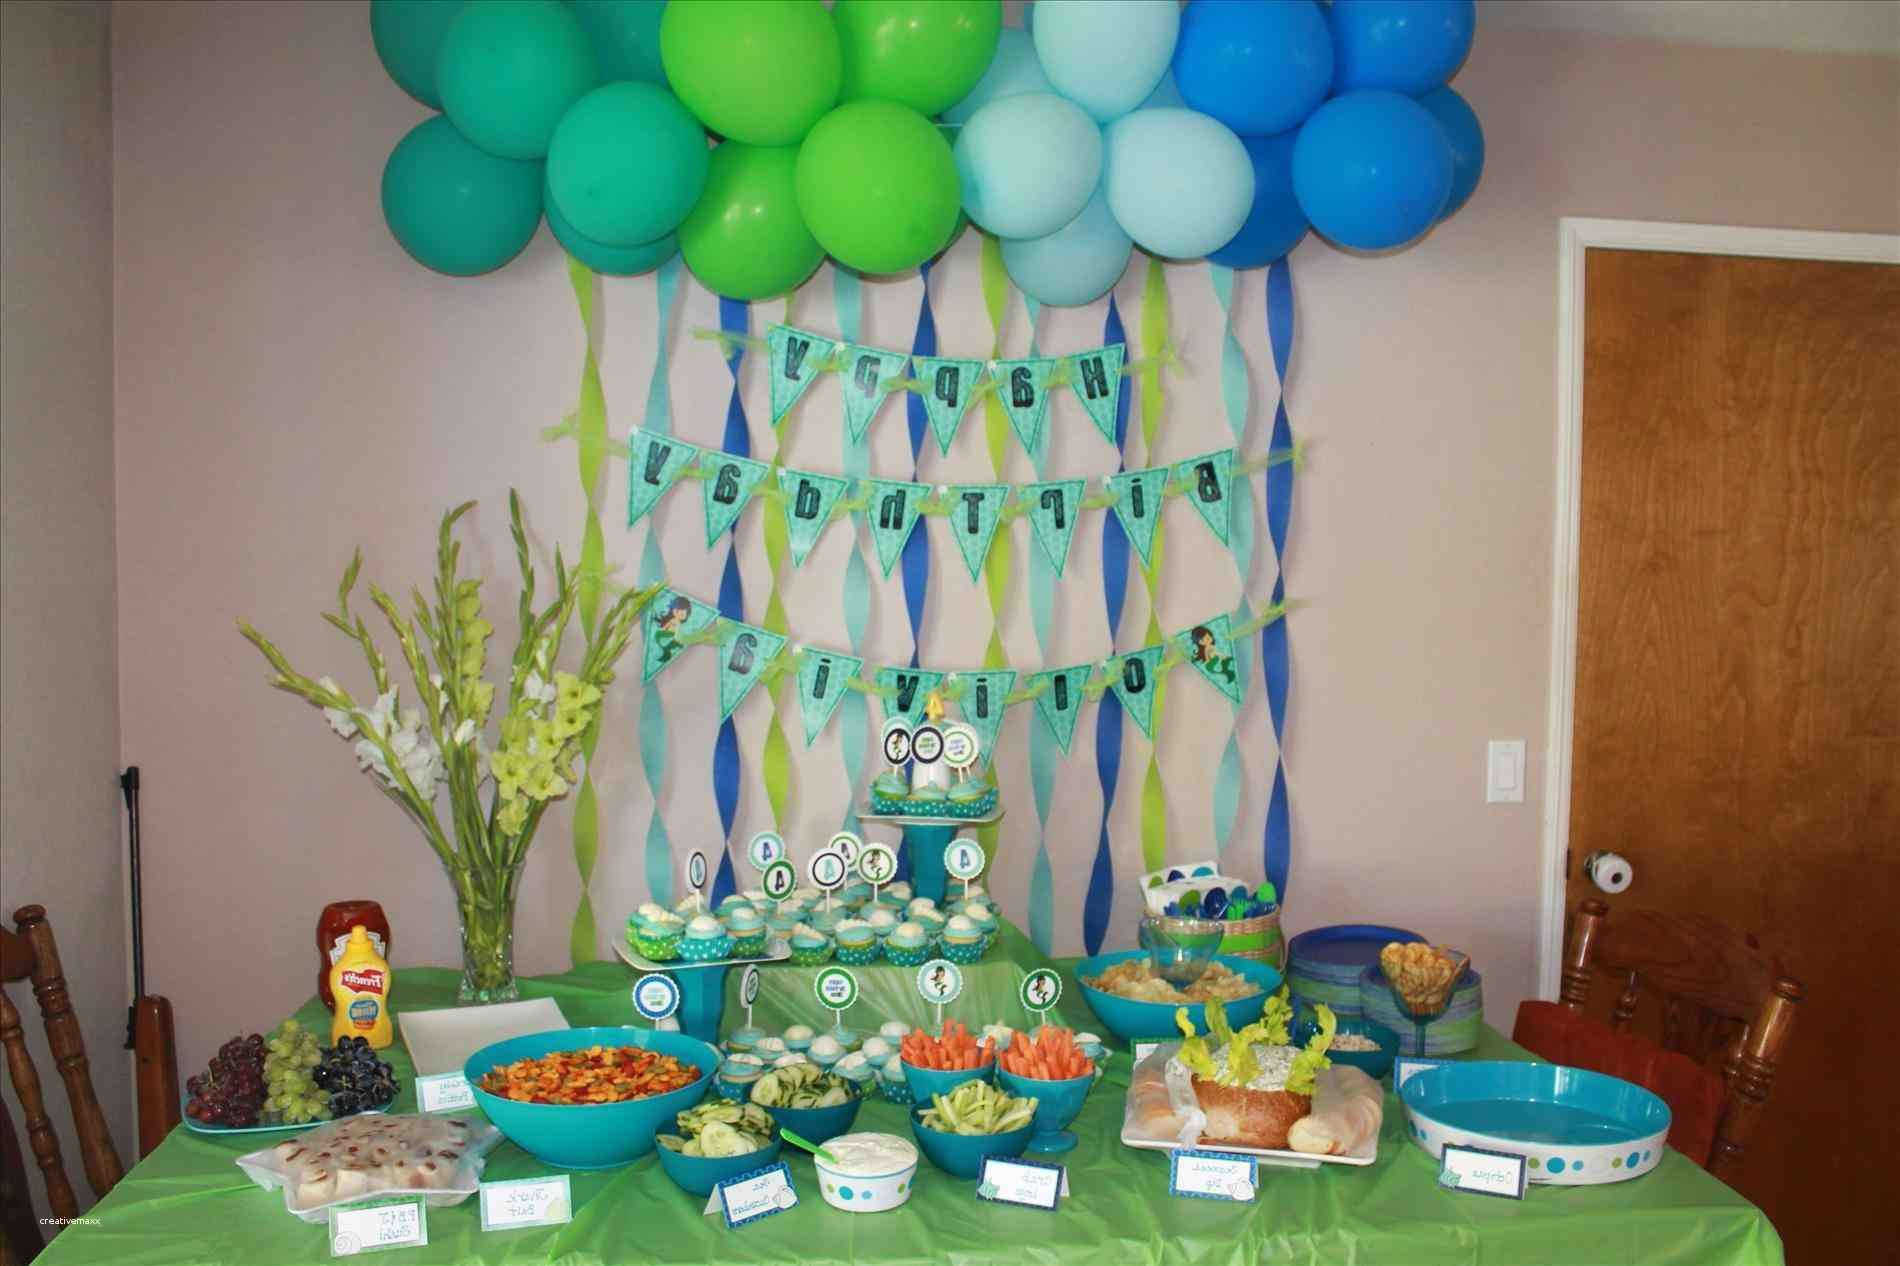 Birthday Party Decoration Ideas Simple
 Awesome 1st Birthday Party Simple Decorations at Home